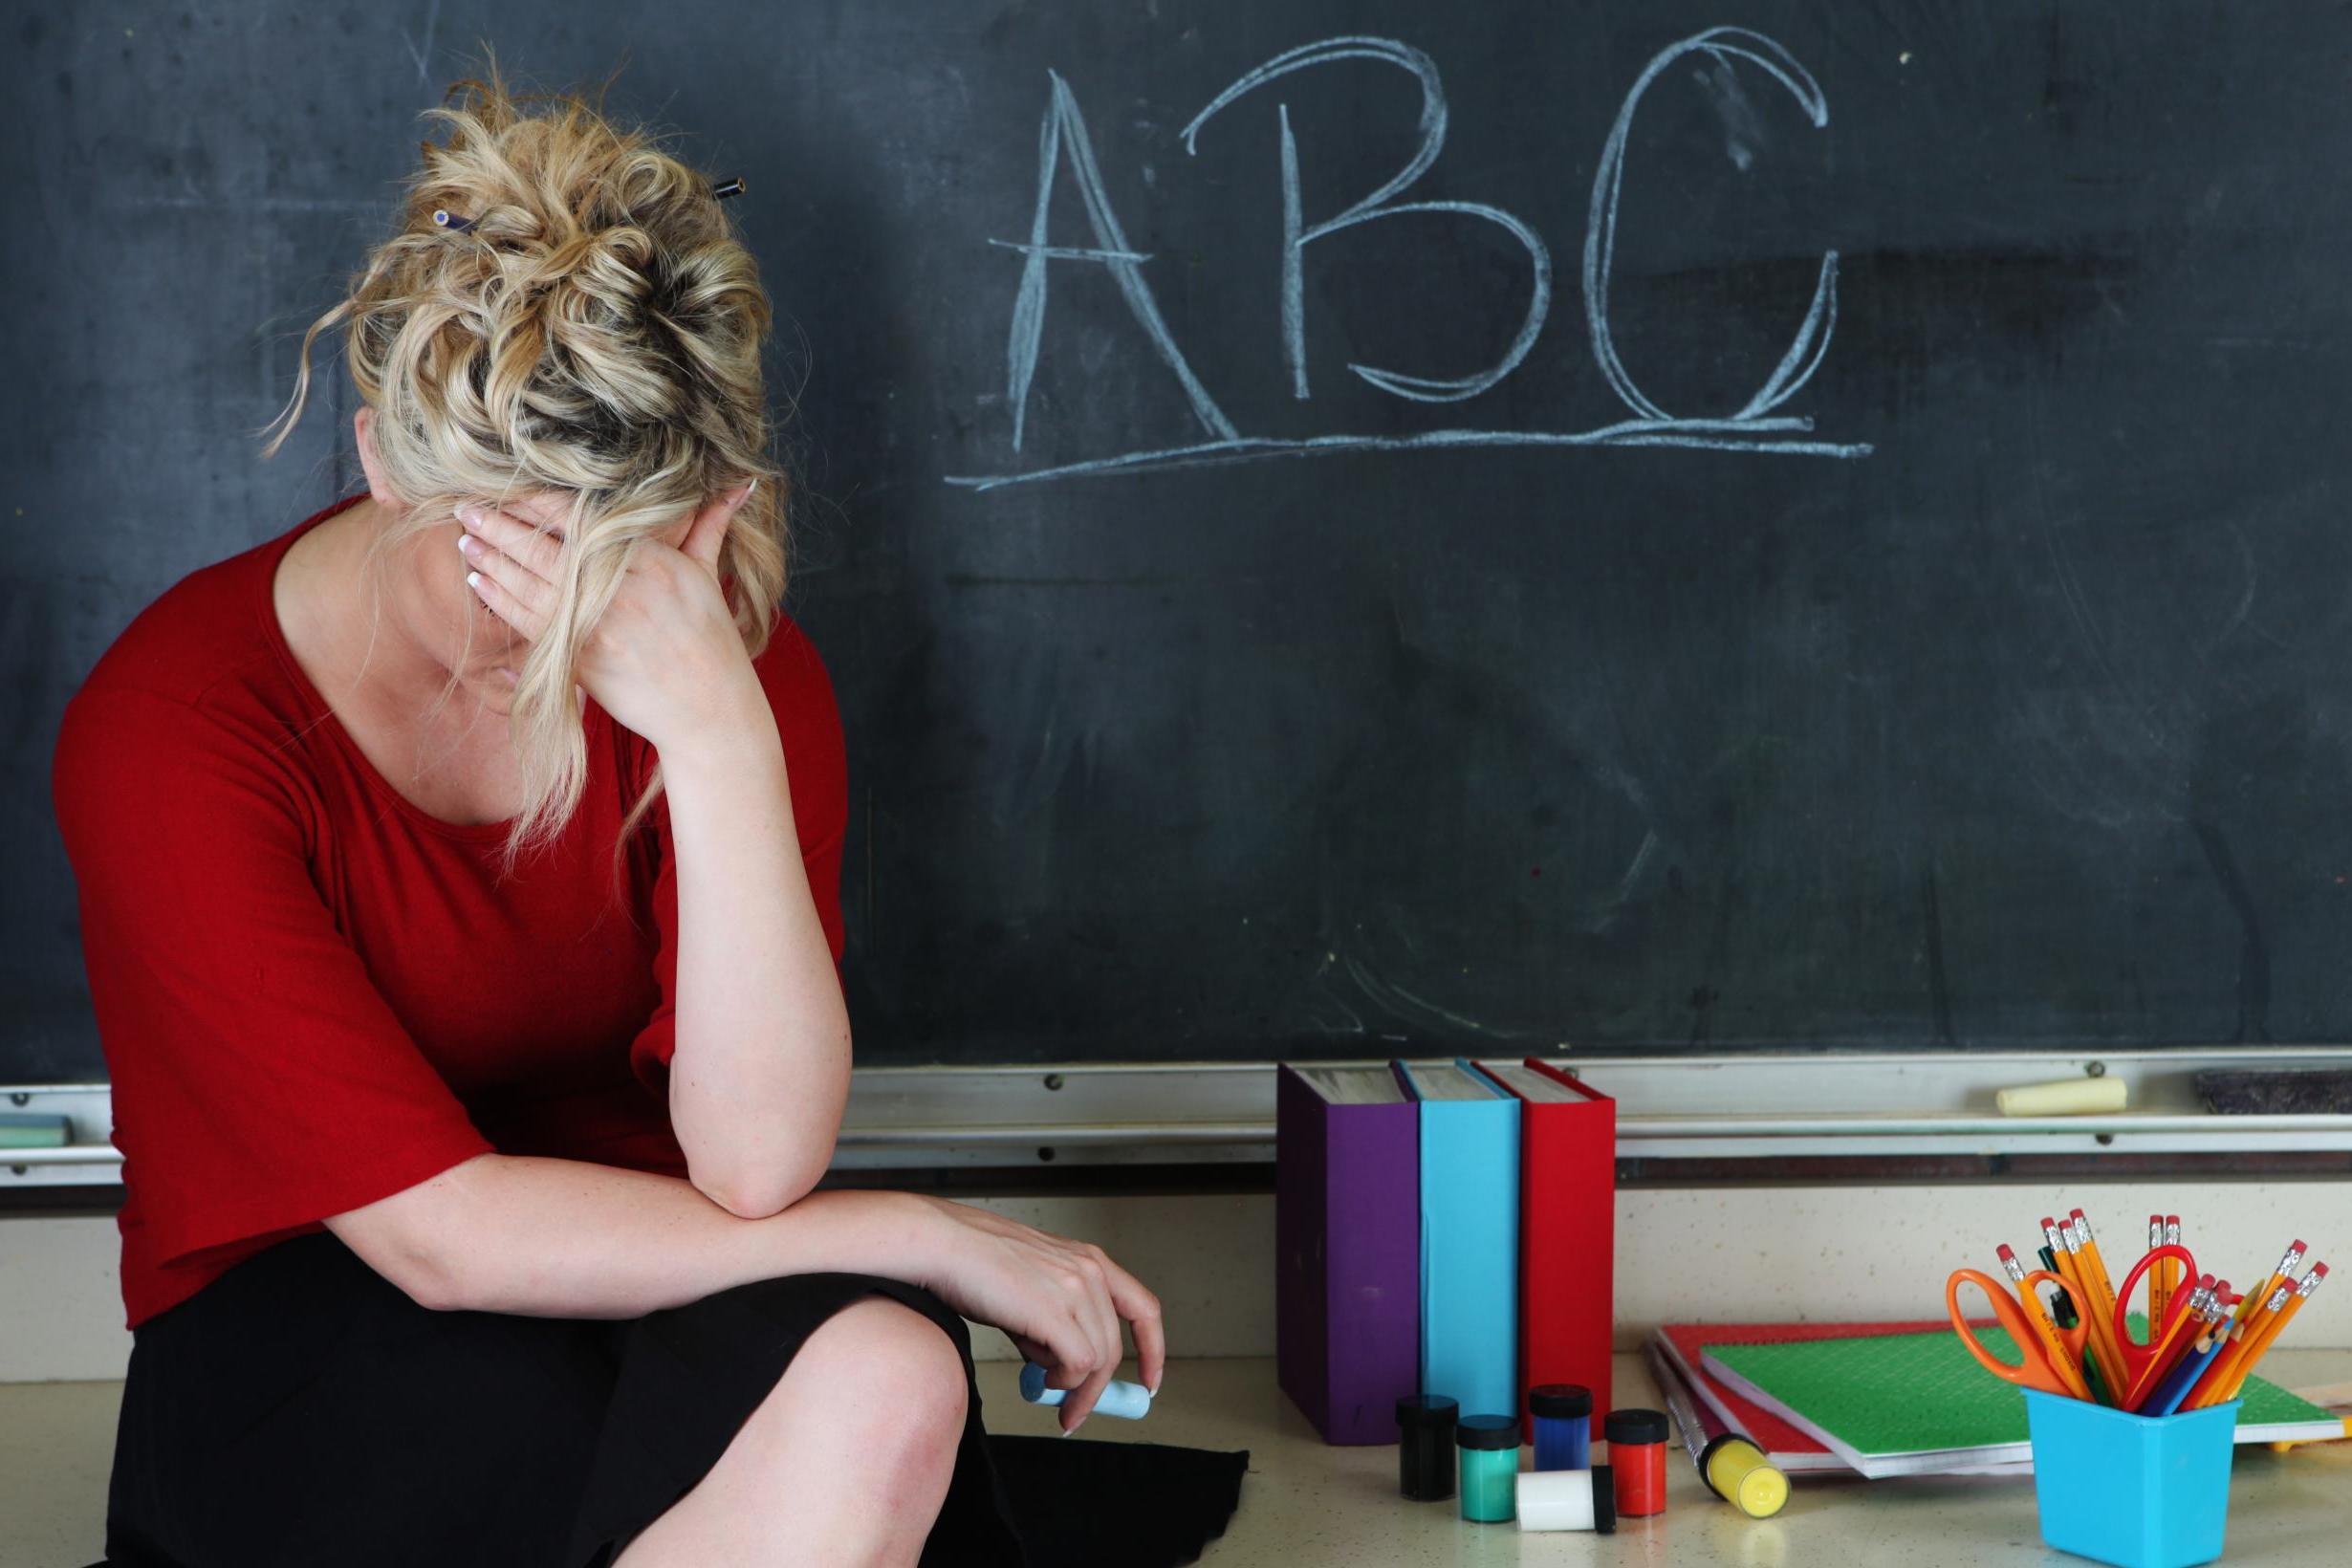 Parents must trust teachers to ‘get on with it’, watchdog says